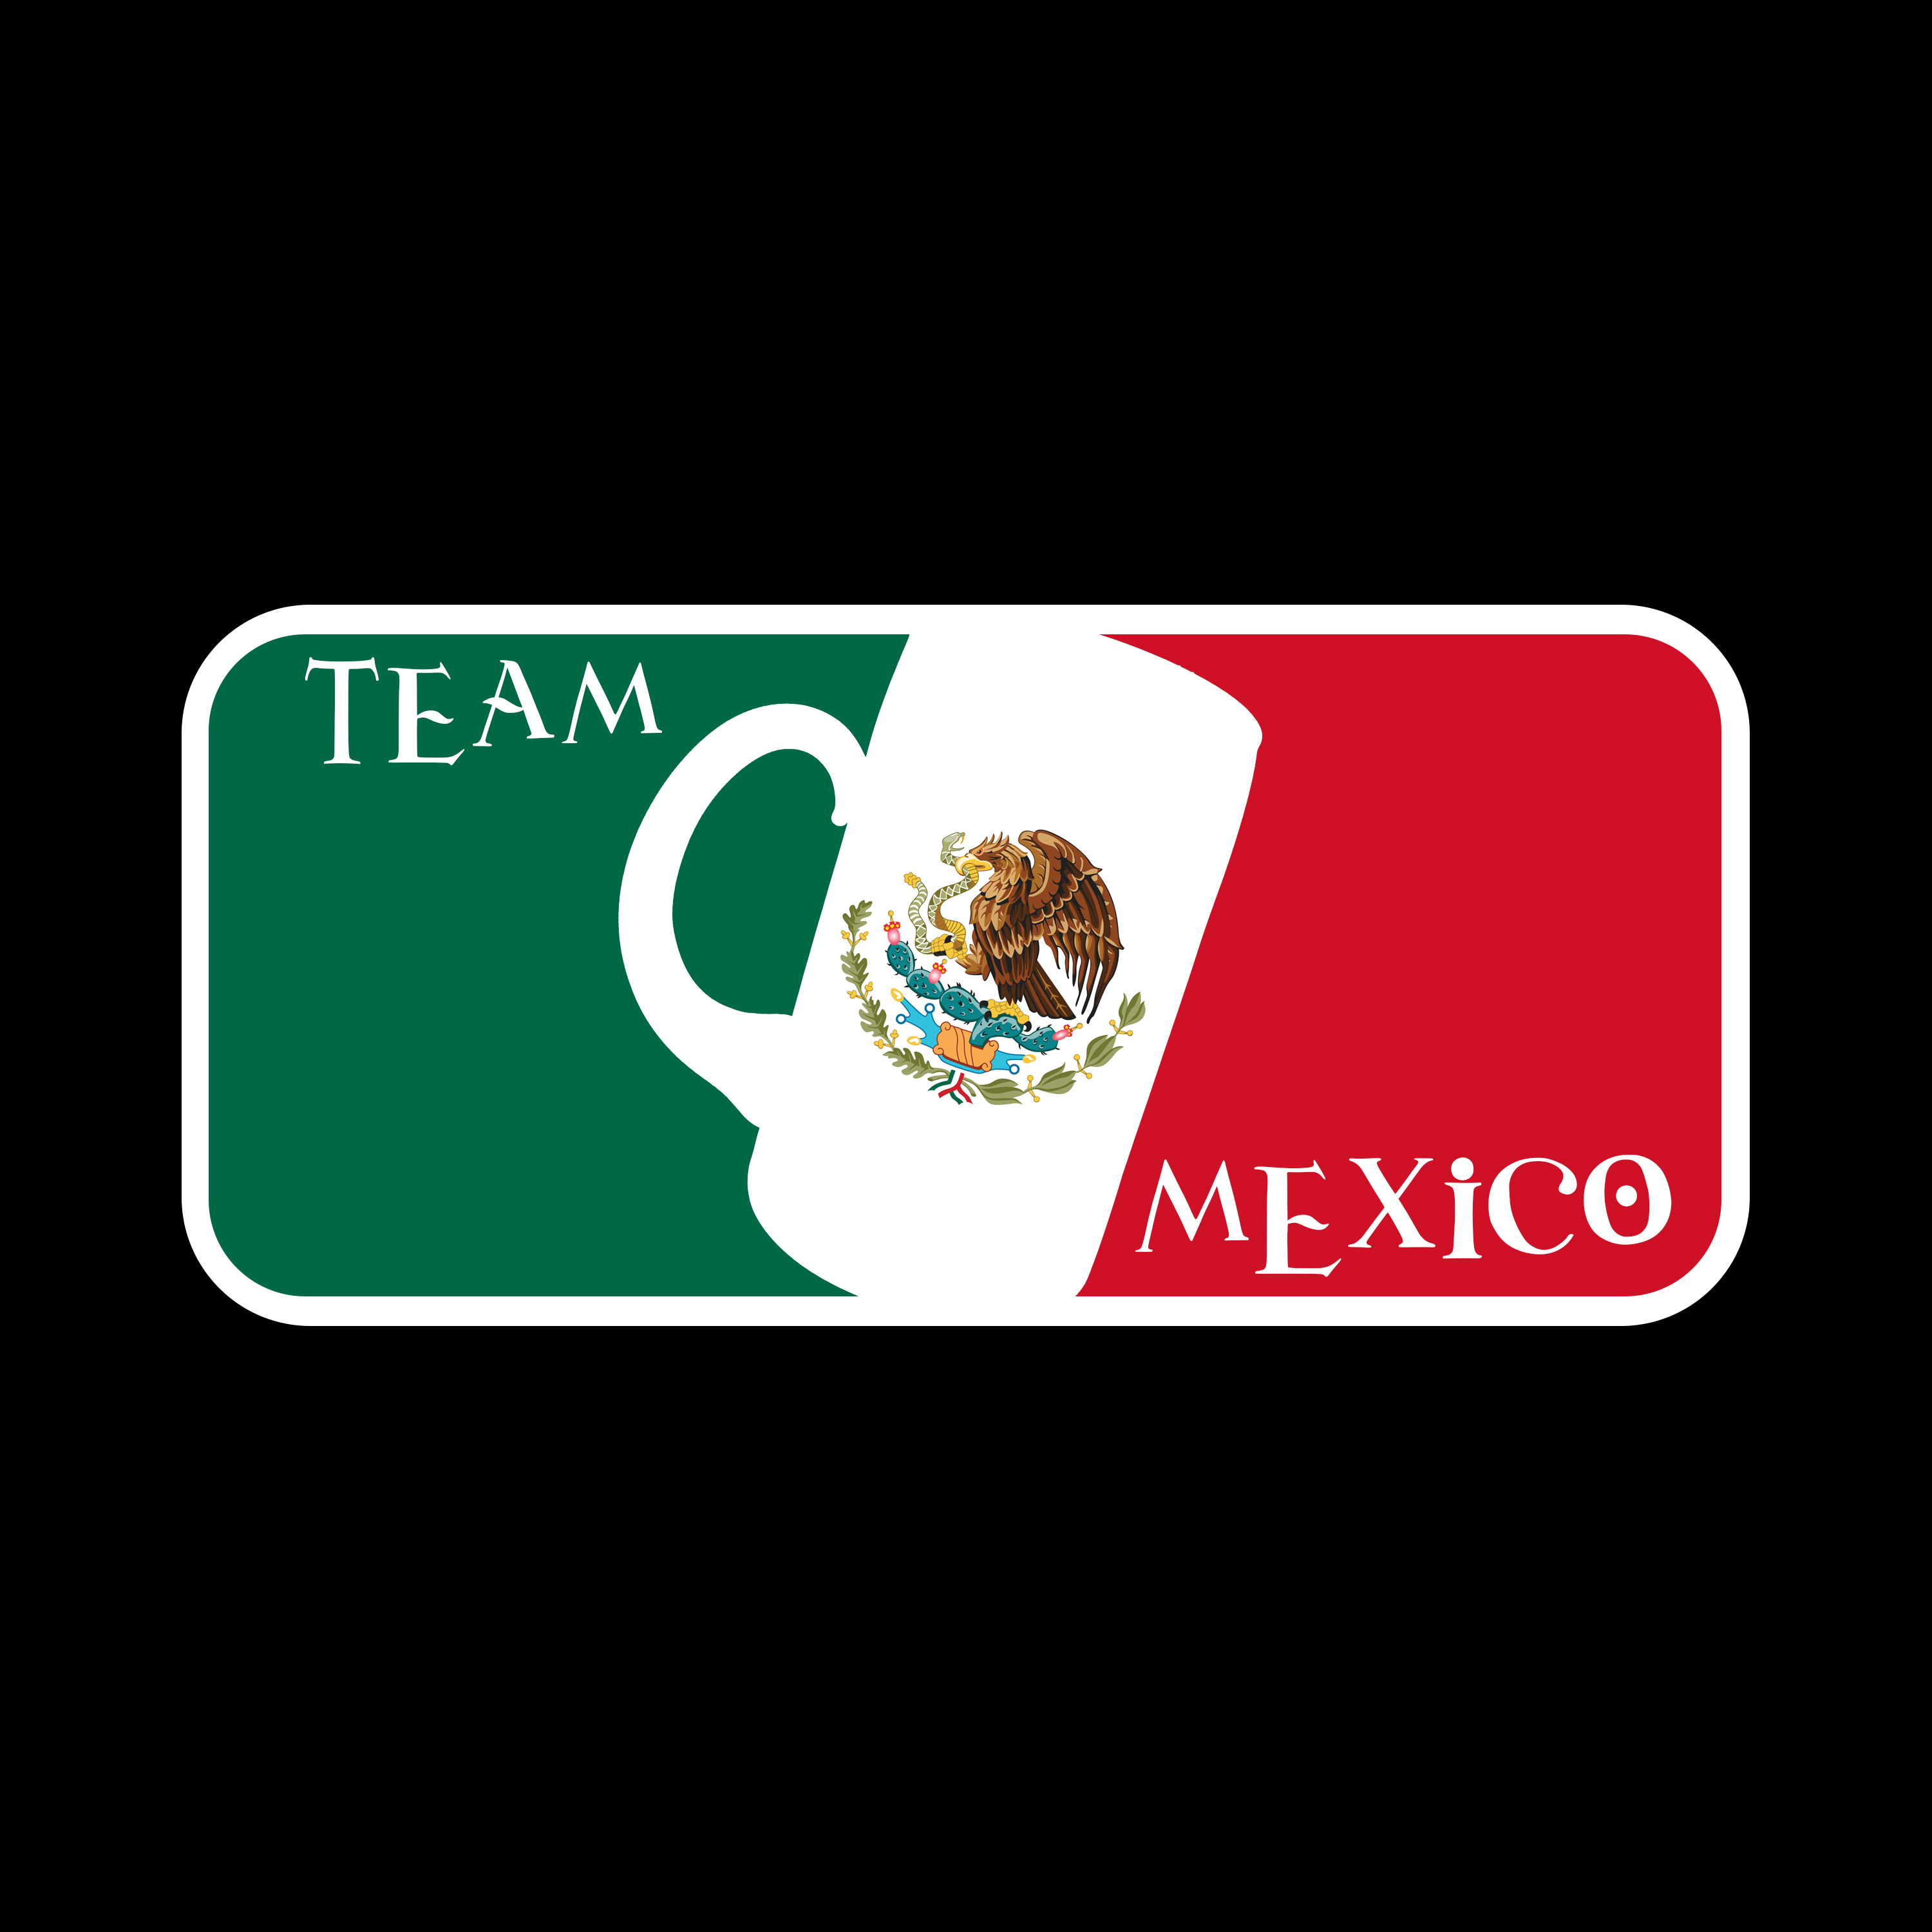 mexico drinking team jersey